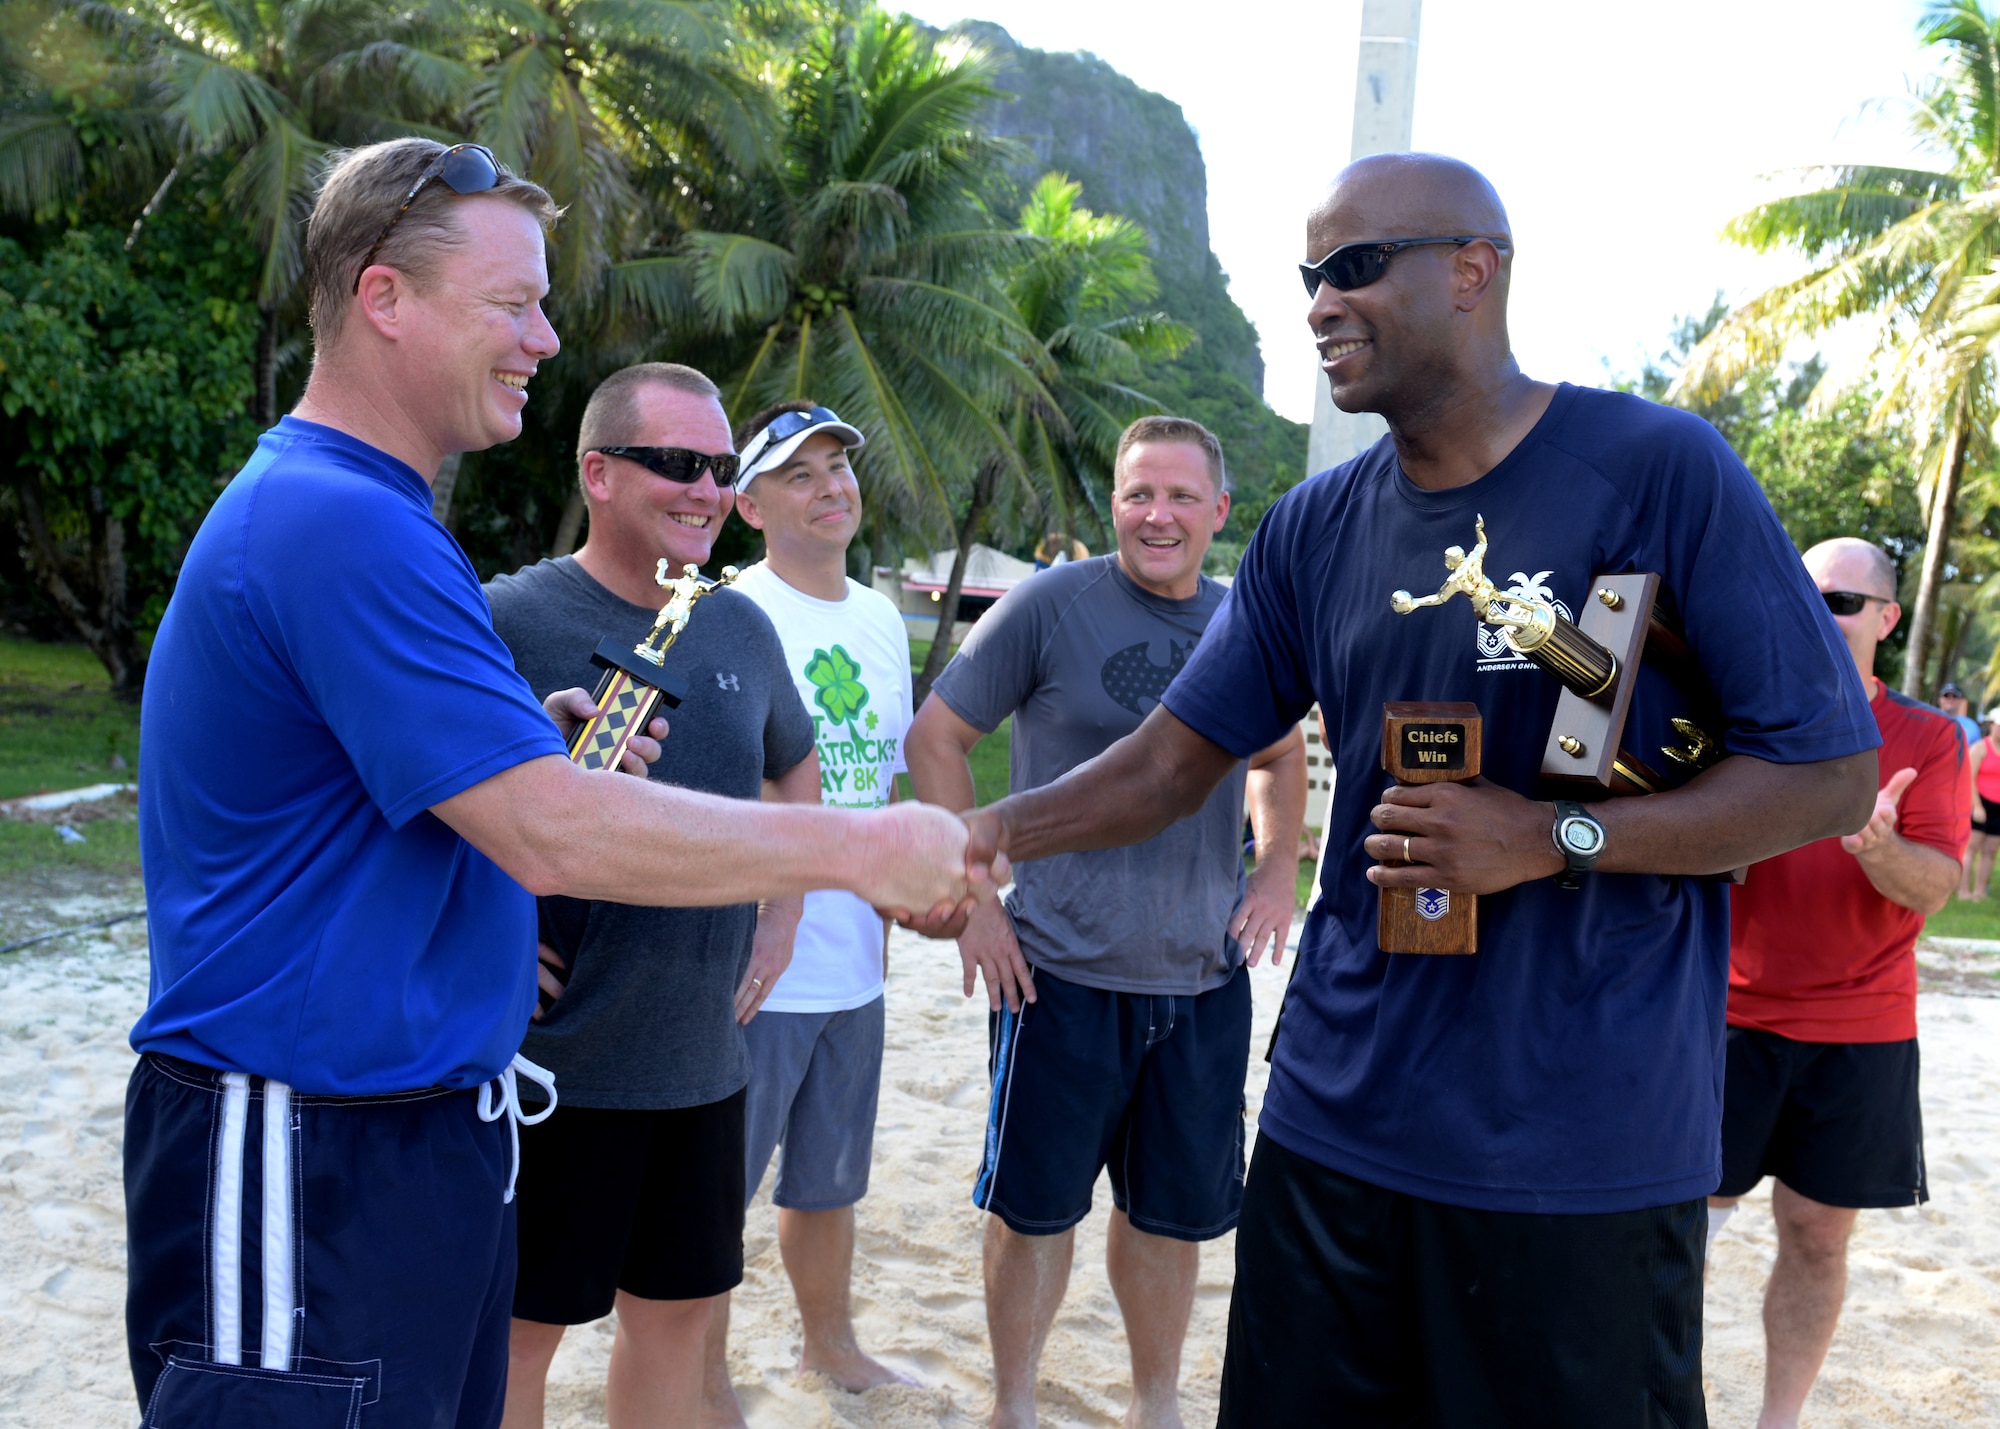 Chief Master Sgt. Michael McMillan, 36th Wing command chief, congratulates Col. John Dunks, 36th Mission Support Group commander, for being the most valuable player during the Chief vs. Eagles volleyball game Oct. 3, 2014, on Andersen Air Force Base, Guam. The game was a part of an ongoing competitive series between the two base leadership groups. (U.S. Air Force photo by Senior Airman Katrina M. Brisbin/Released)